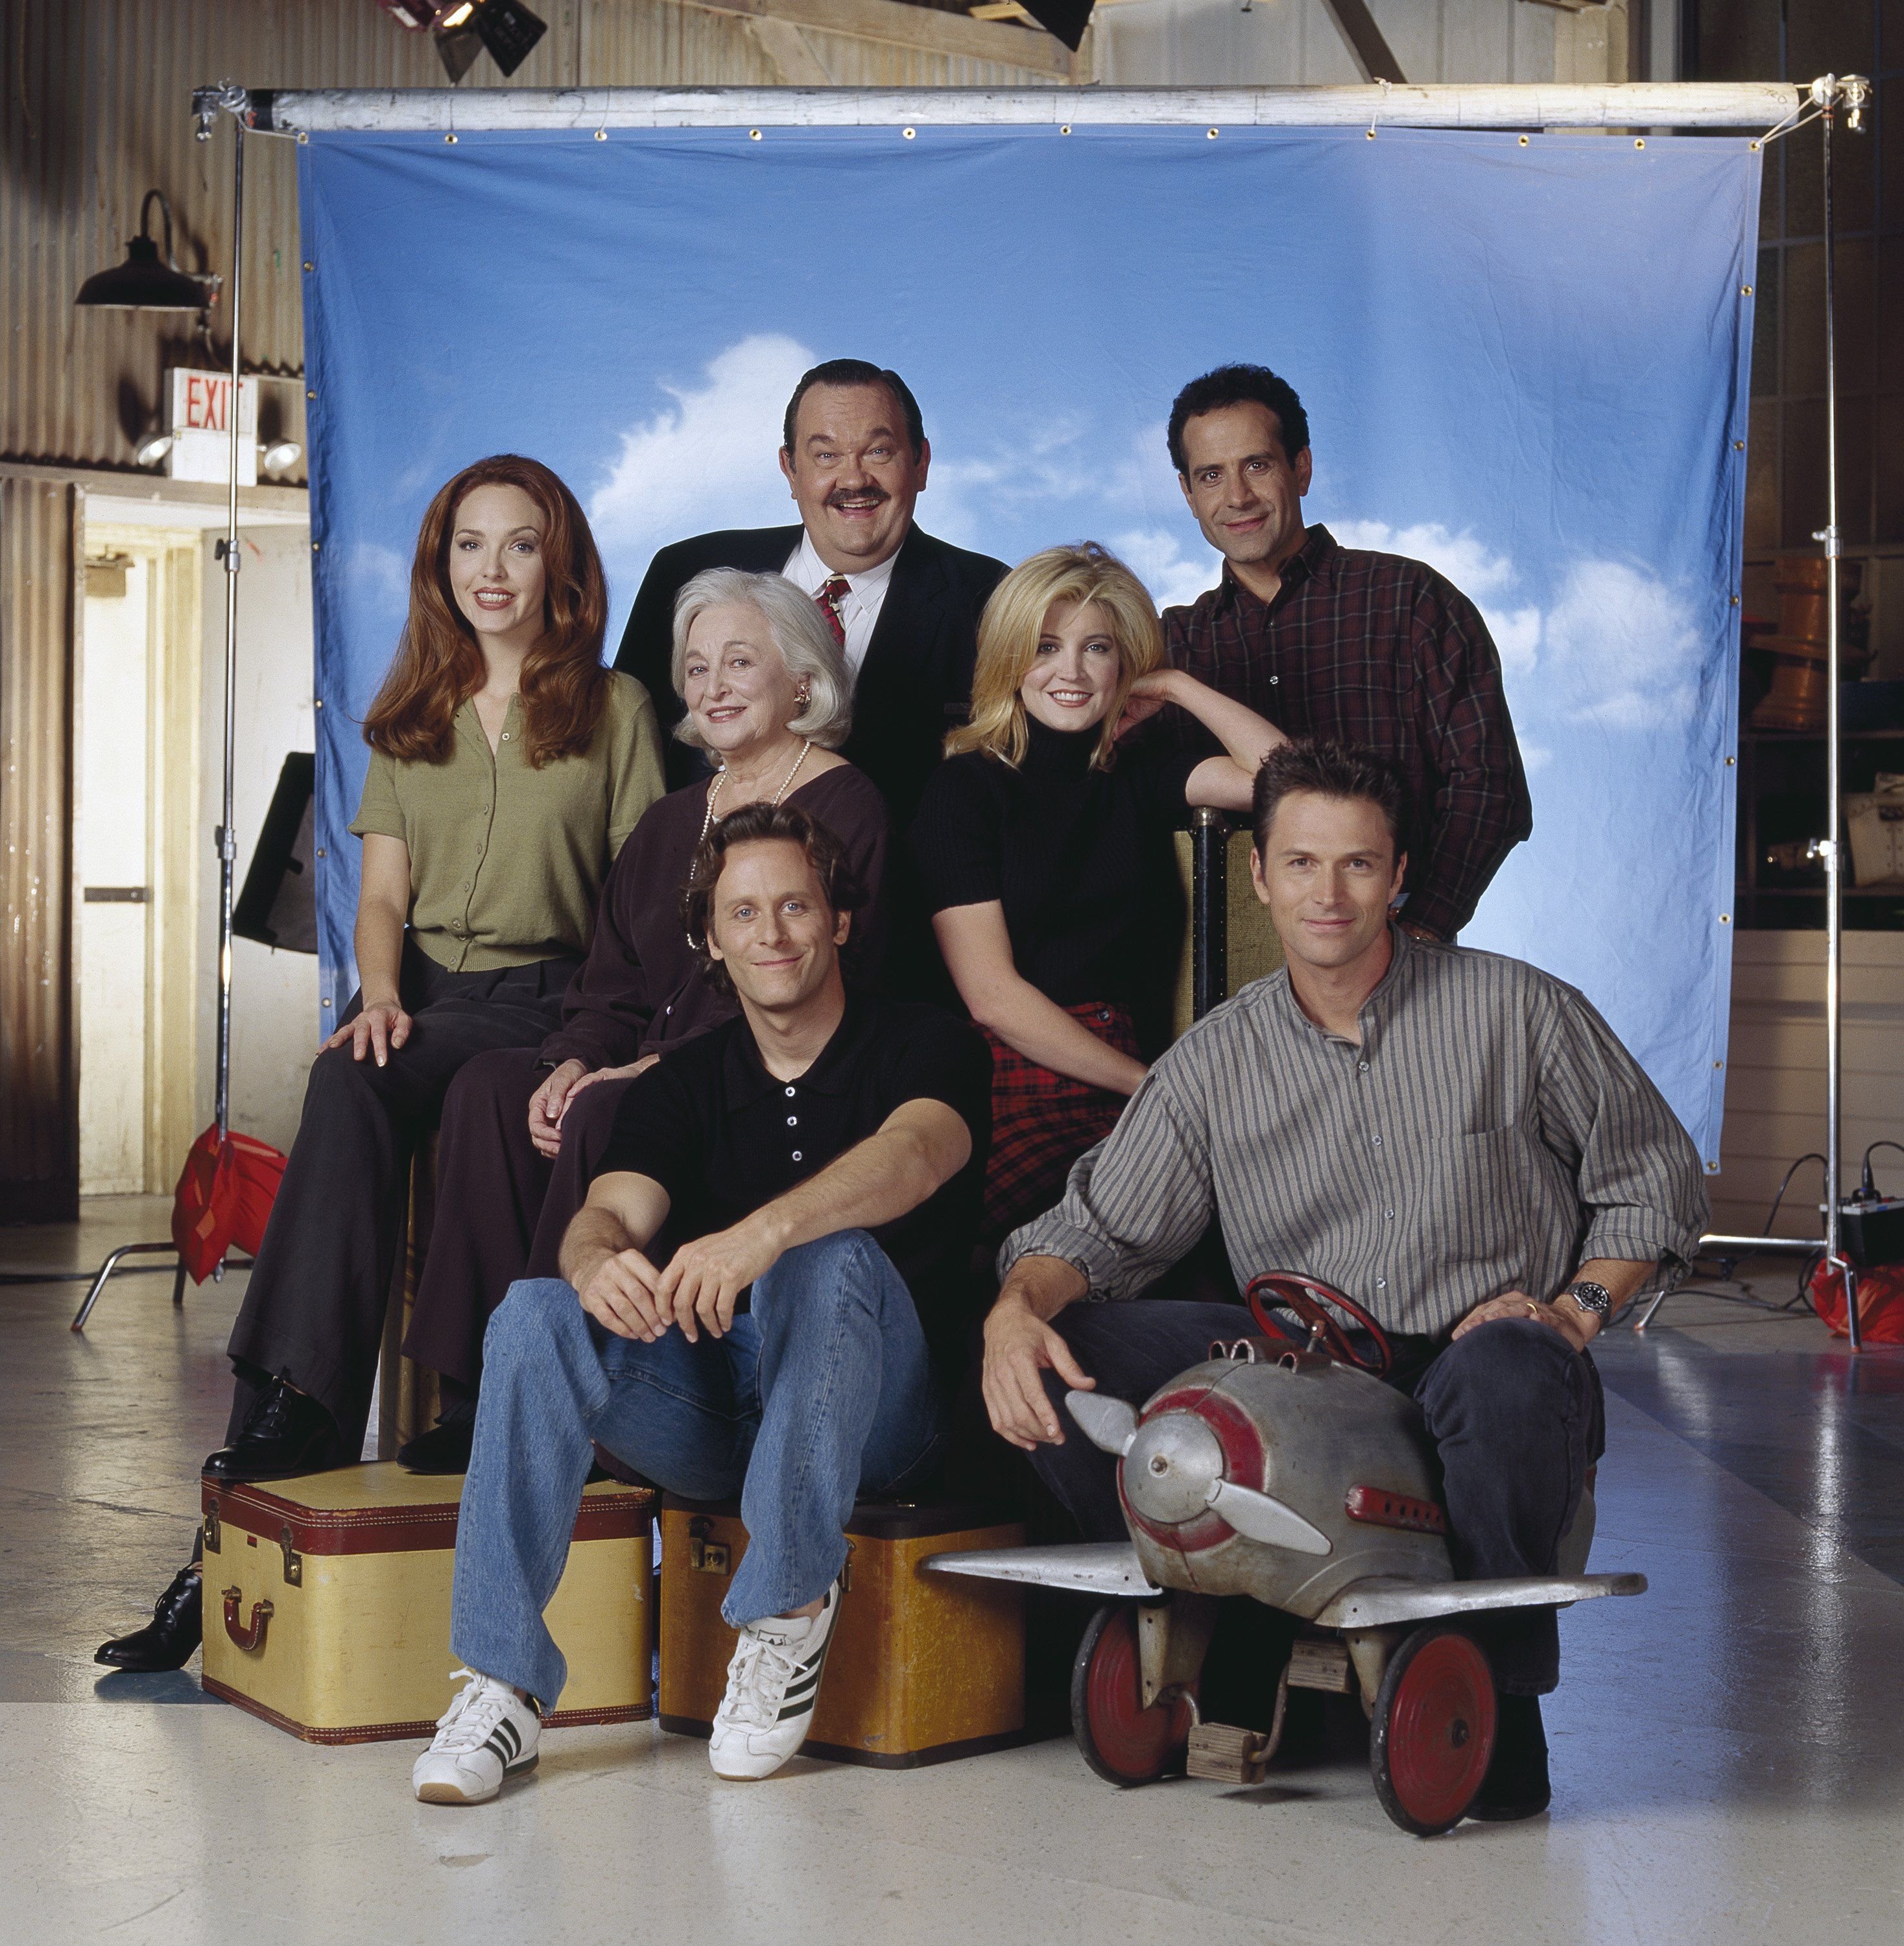 David Schramm, Tony Shalhoub, Amy Yasbeck, Rebecca Schull, Crystal Bernard, Steven Weber, and Timothy Daly in "Wings." | Source: Getty Images